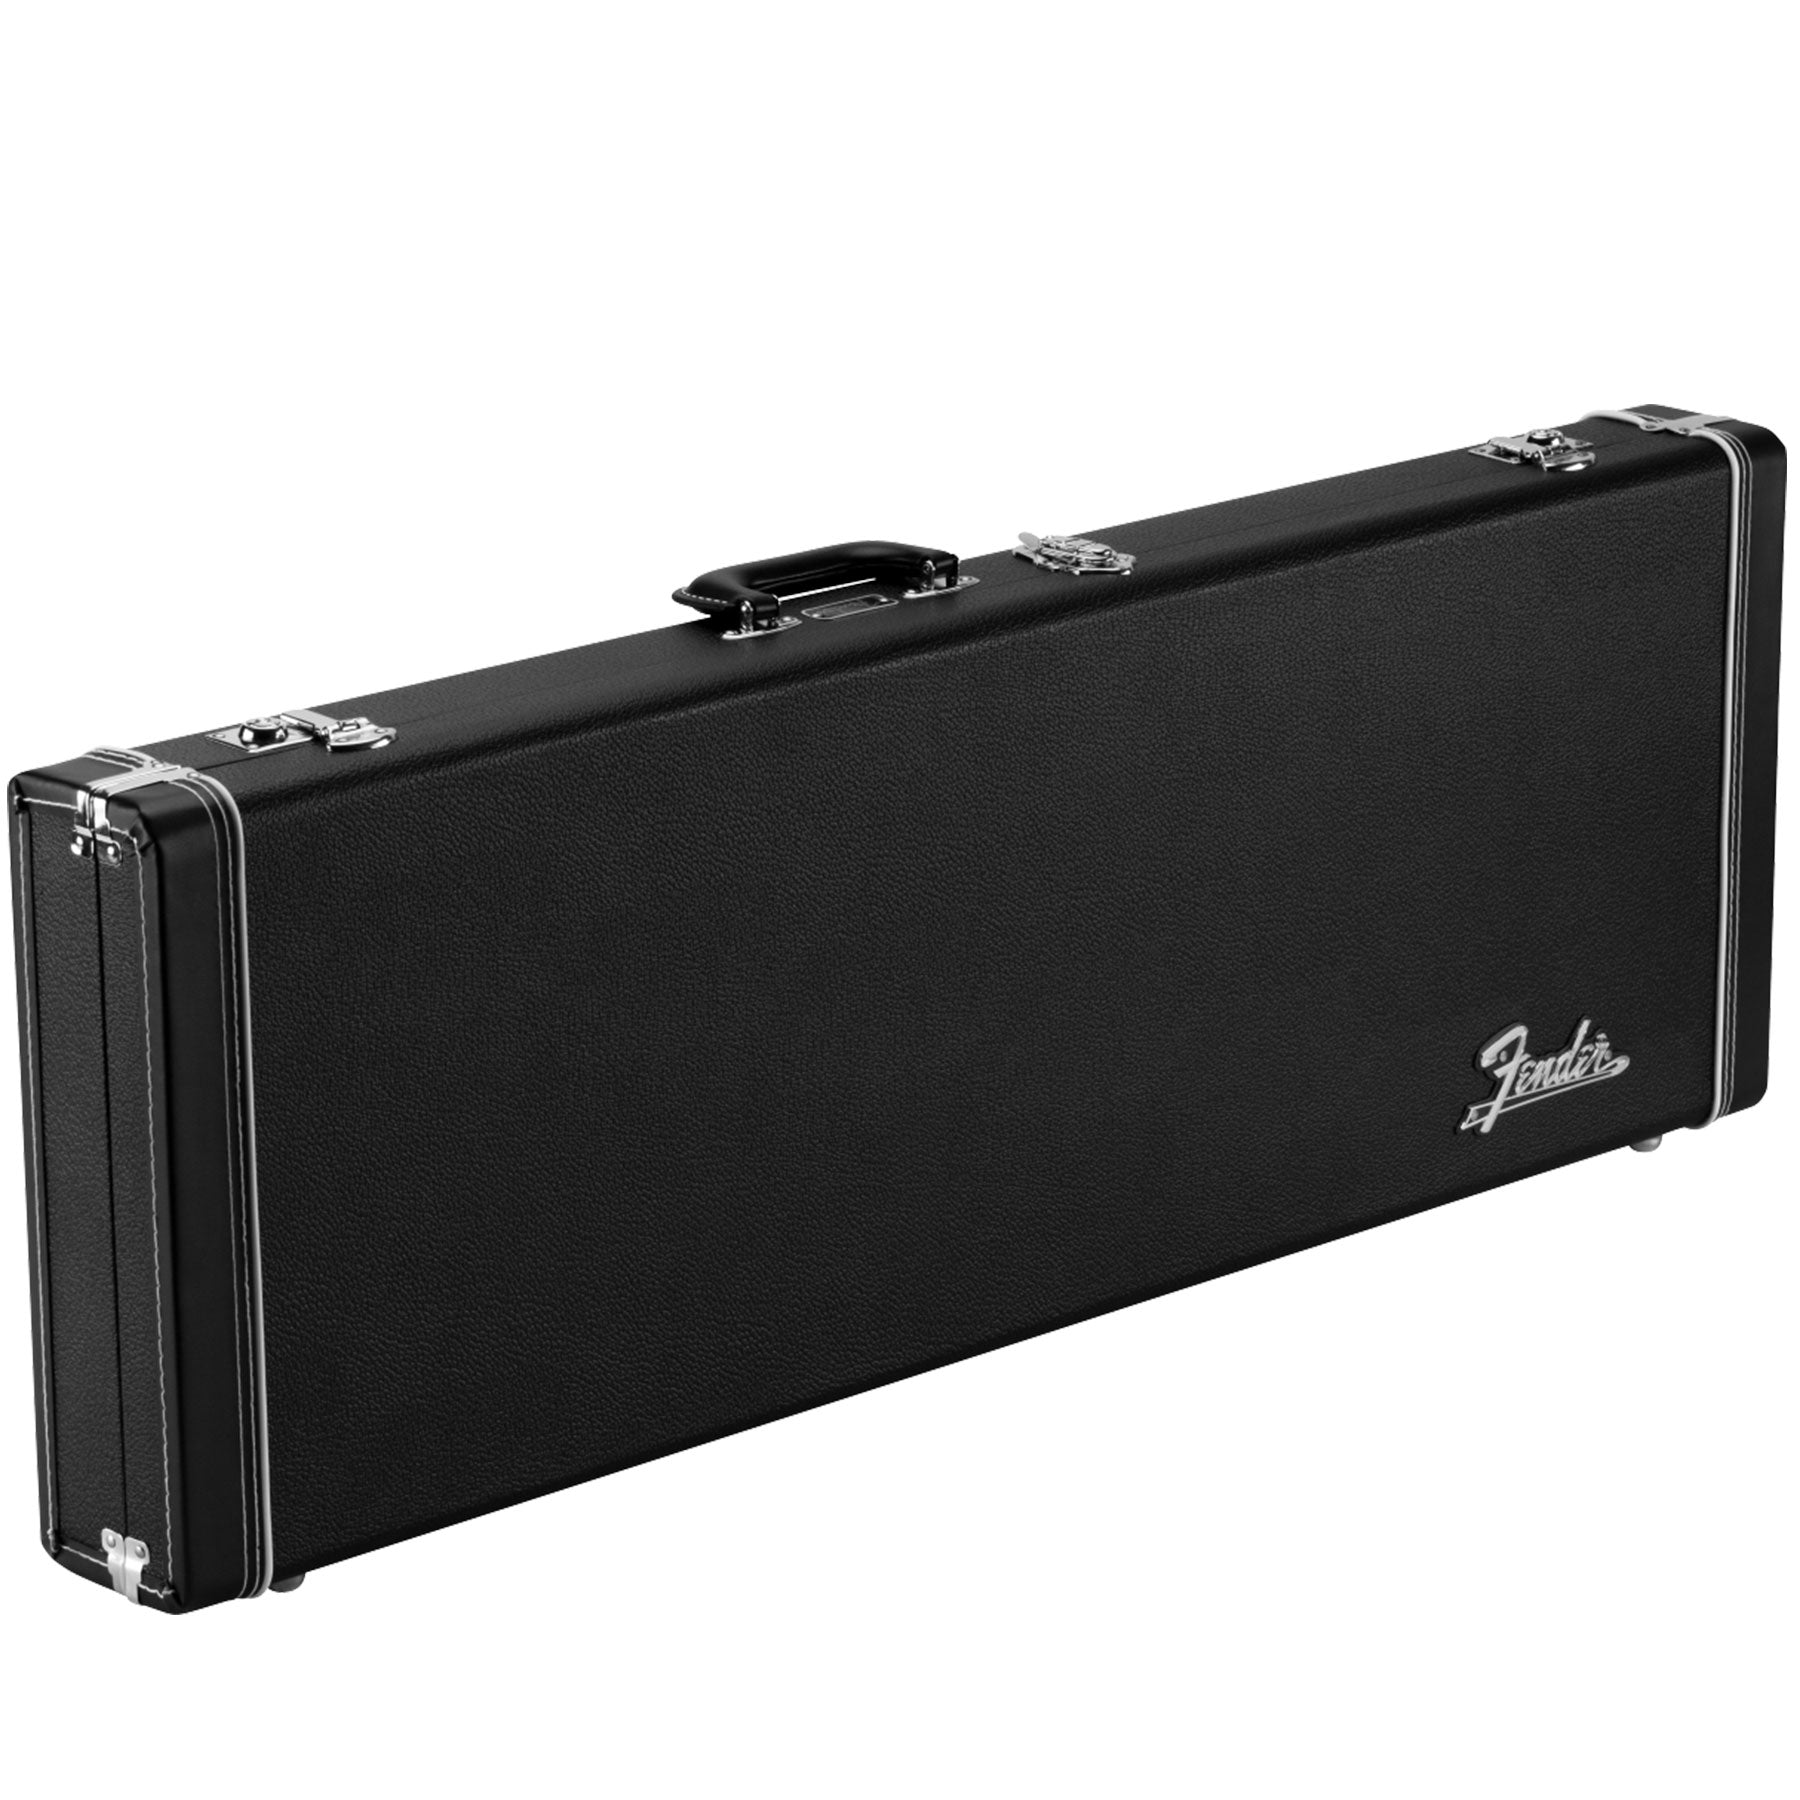 FENDER CLASSIC SERIES WOOD CASE FOR STRATOCASTER OR TELECASTER